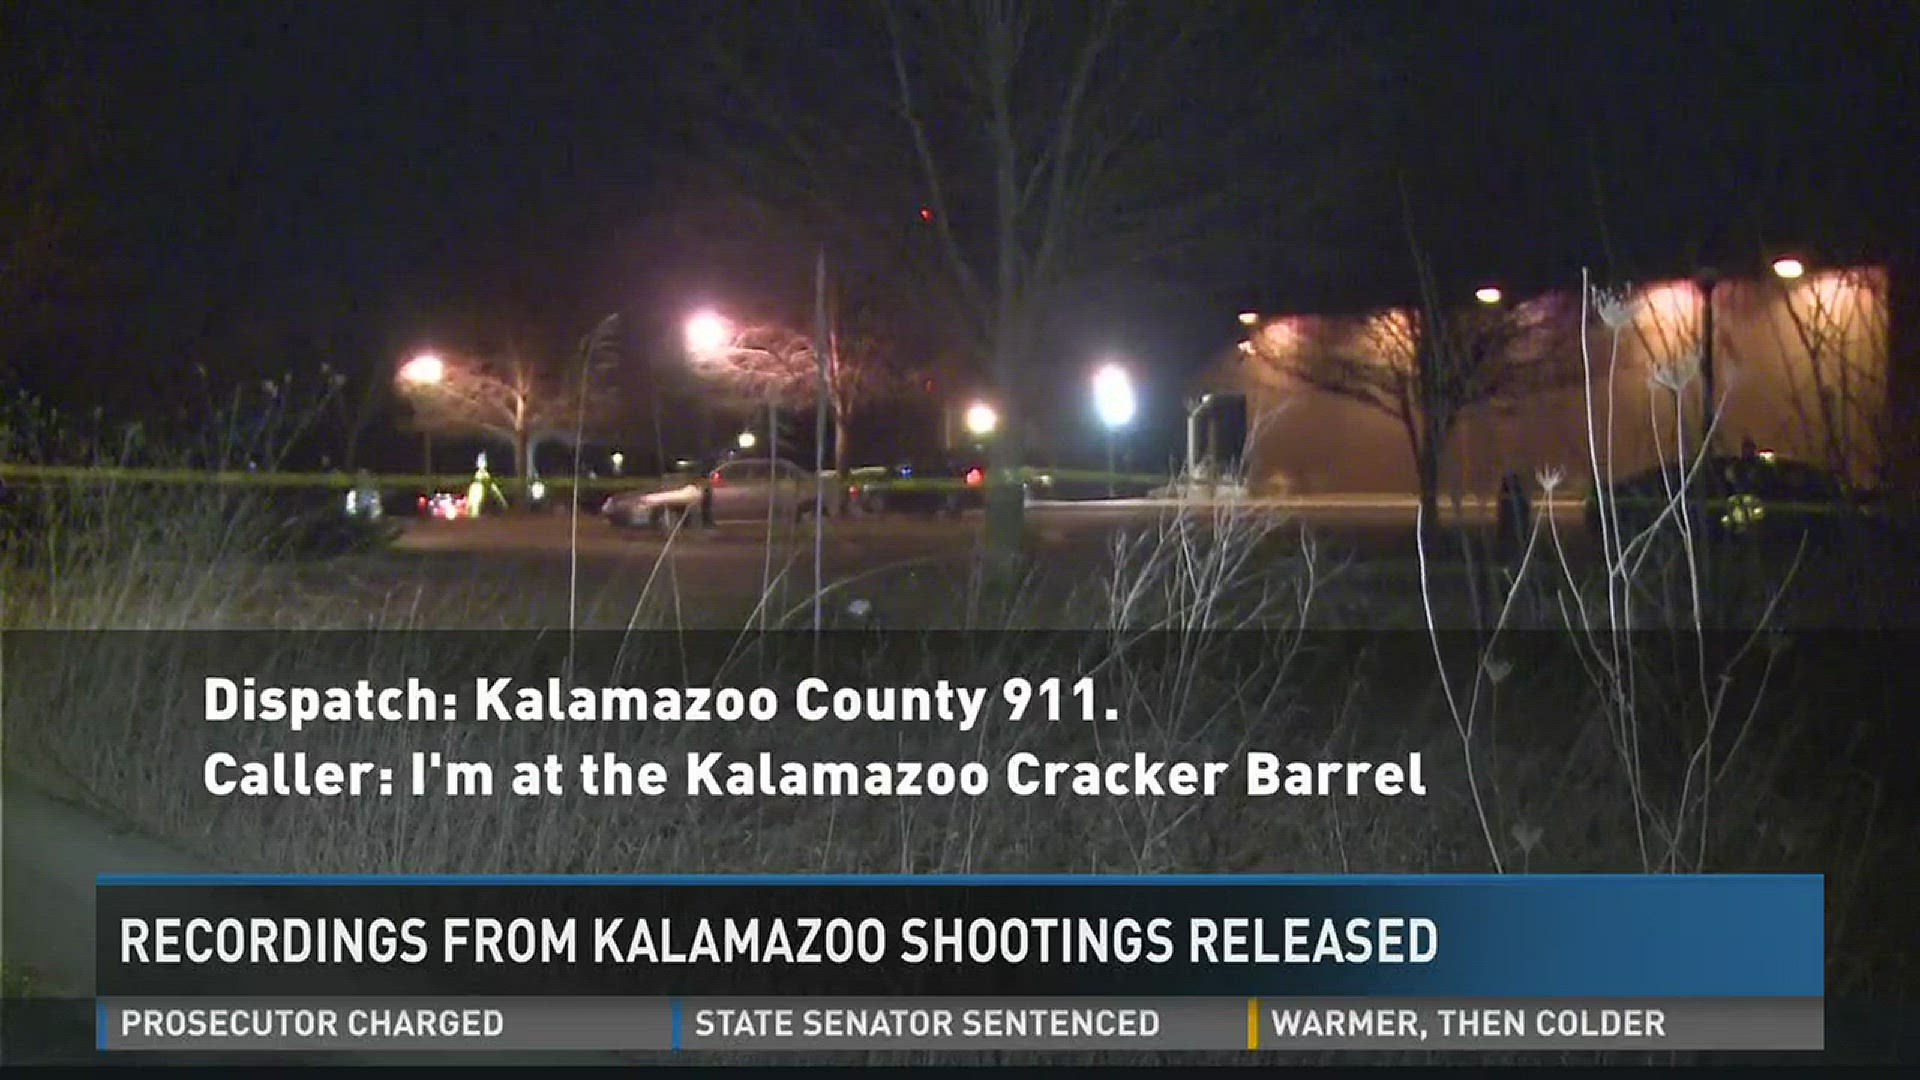 Kalamazoo authorities released several pages of documents, 911 calls and videos in relation to the February 2016 shooting spree.